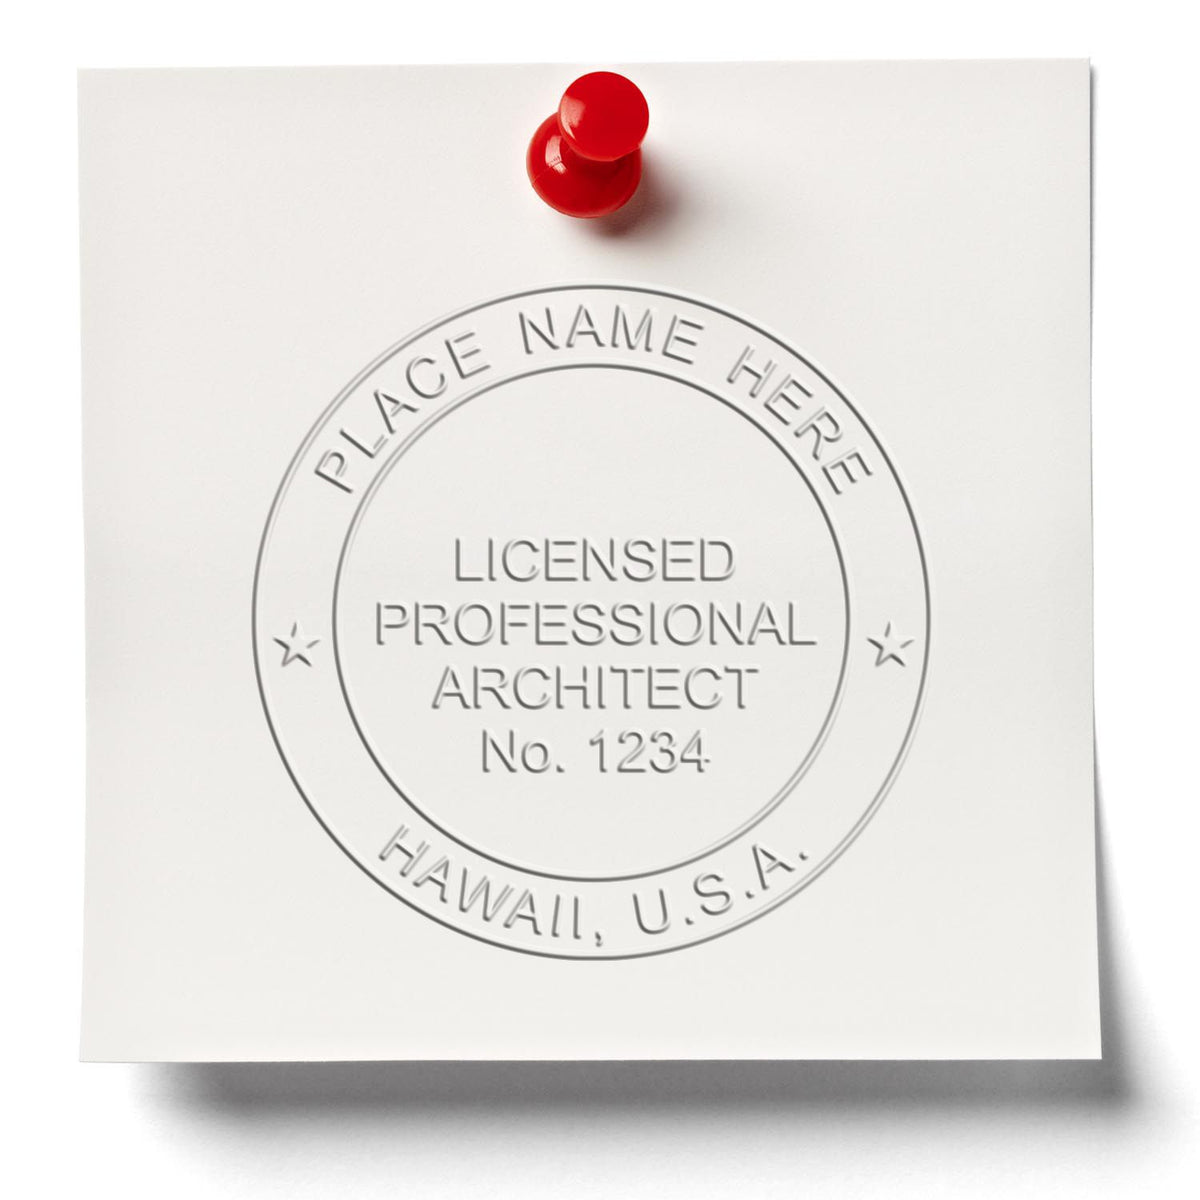 A photograph of the Hybrid Hawaii Architect Seal stamp impression reveals a vivid, professional image of the on paper.